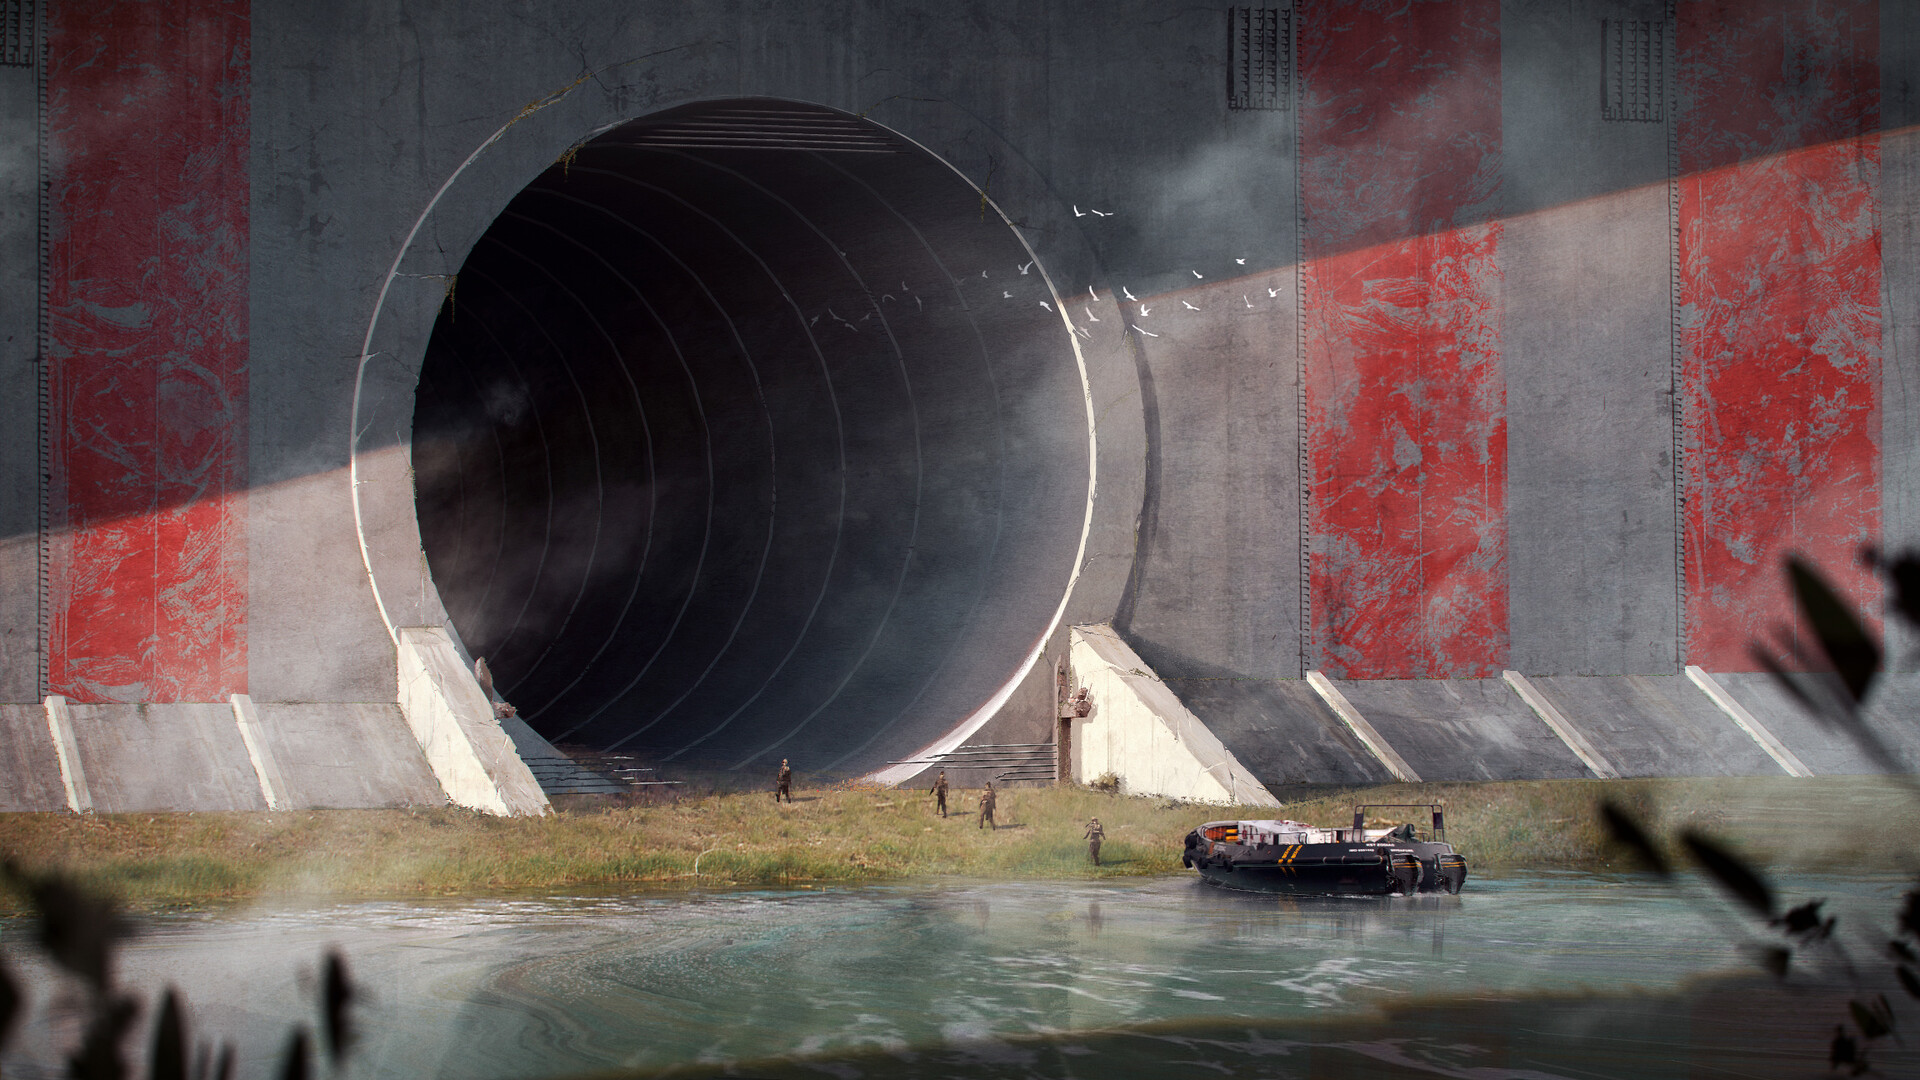 General 1920x1080 architecture tunnel boat environment concrete military birds water stripes